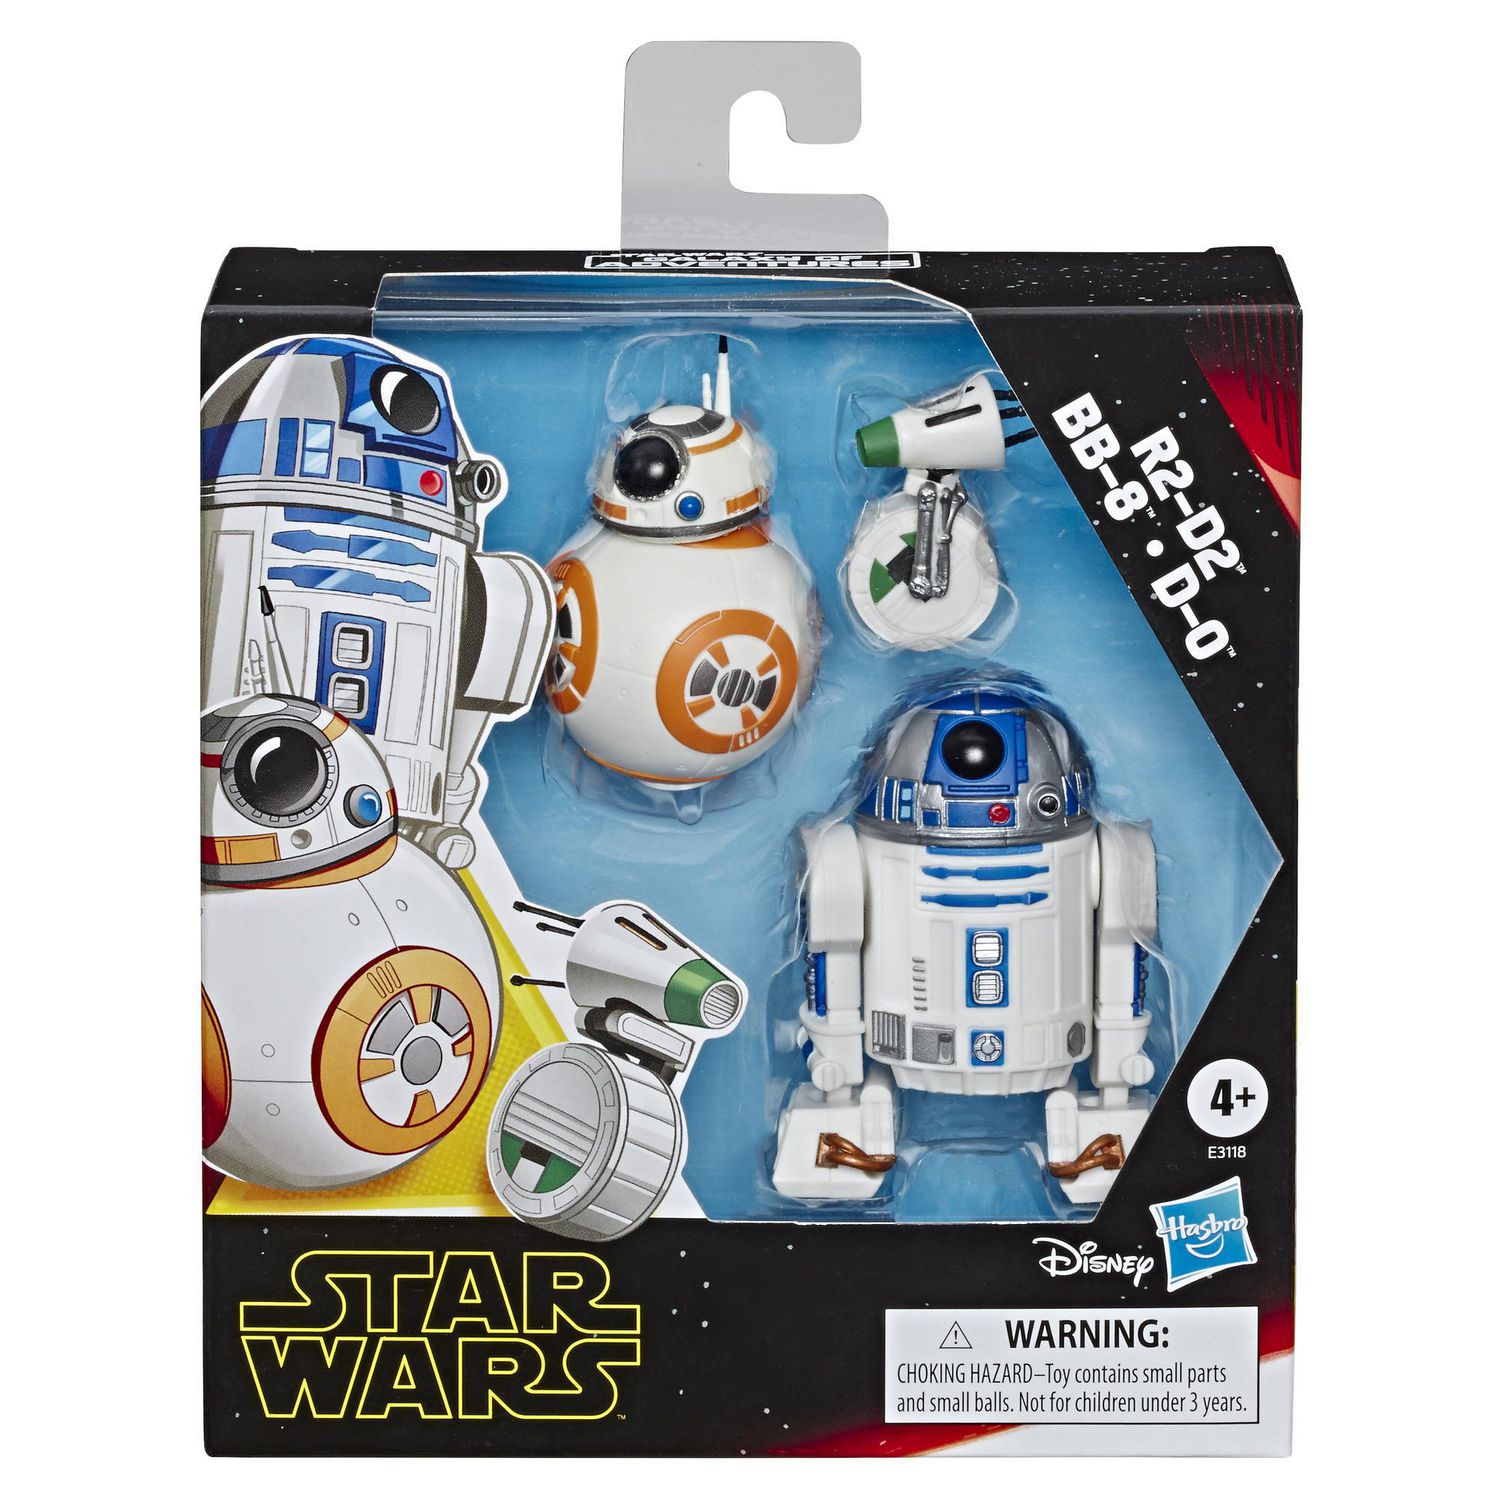 Star Wars Galaxy of Adventures R2-D2, BB-8, D-O Action Figure 3